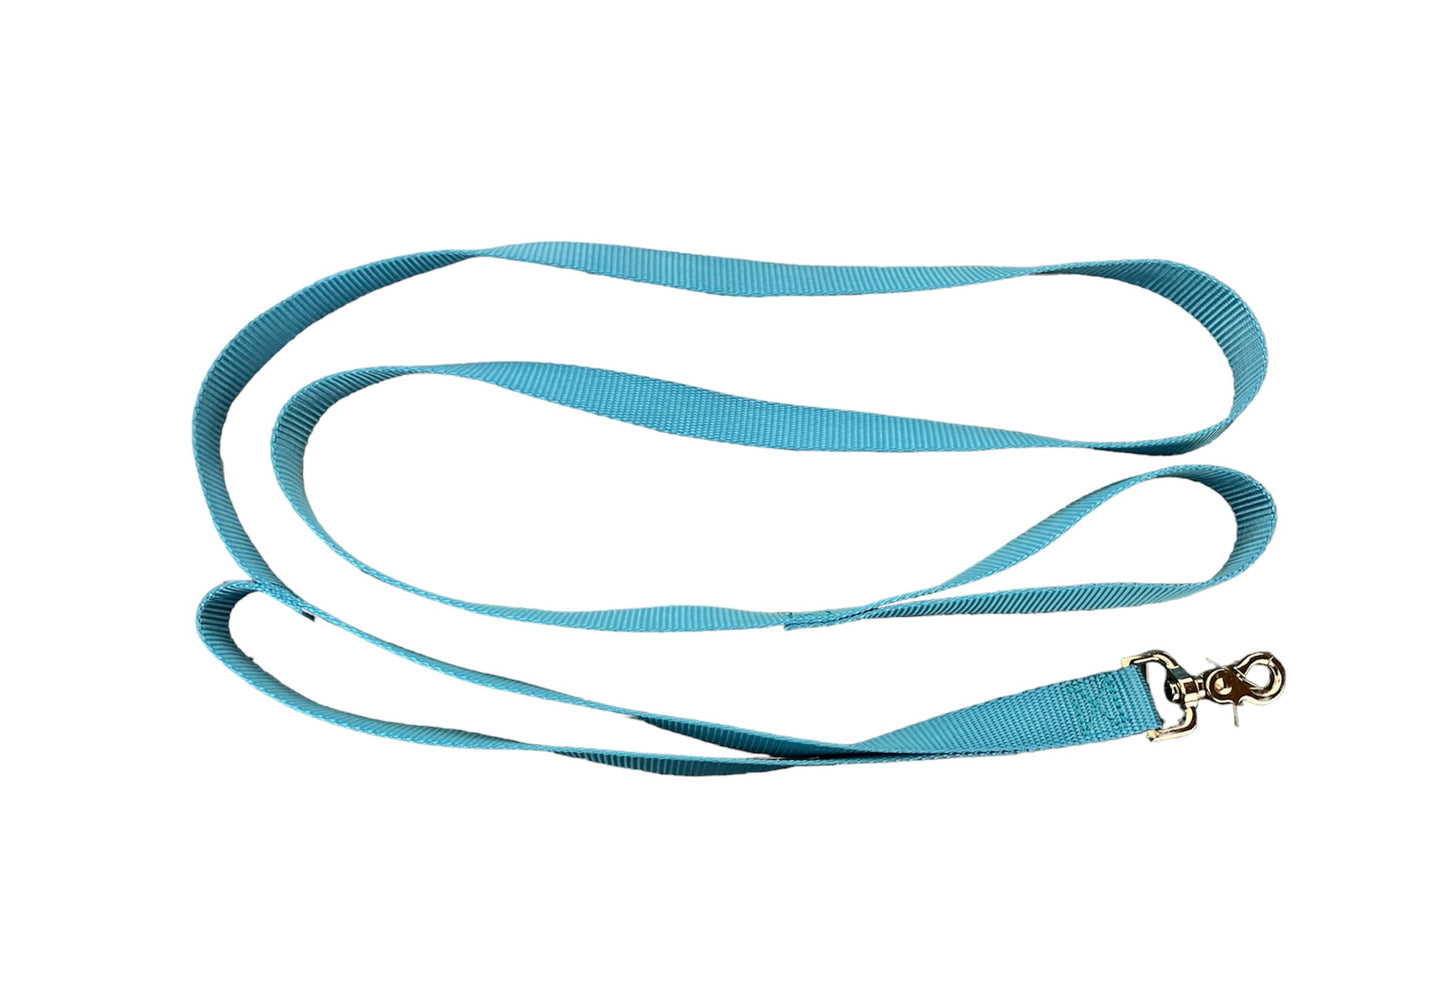 1" Nylon Leash 4' or 6' WITH TRAFFIC HANDLE